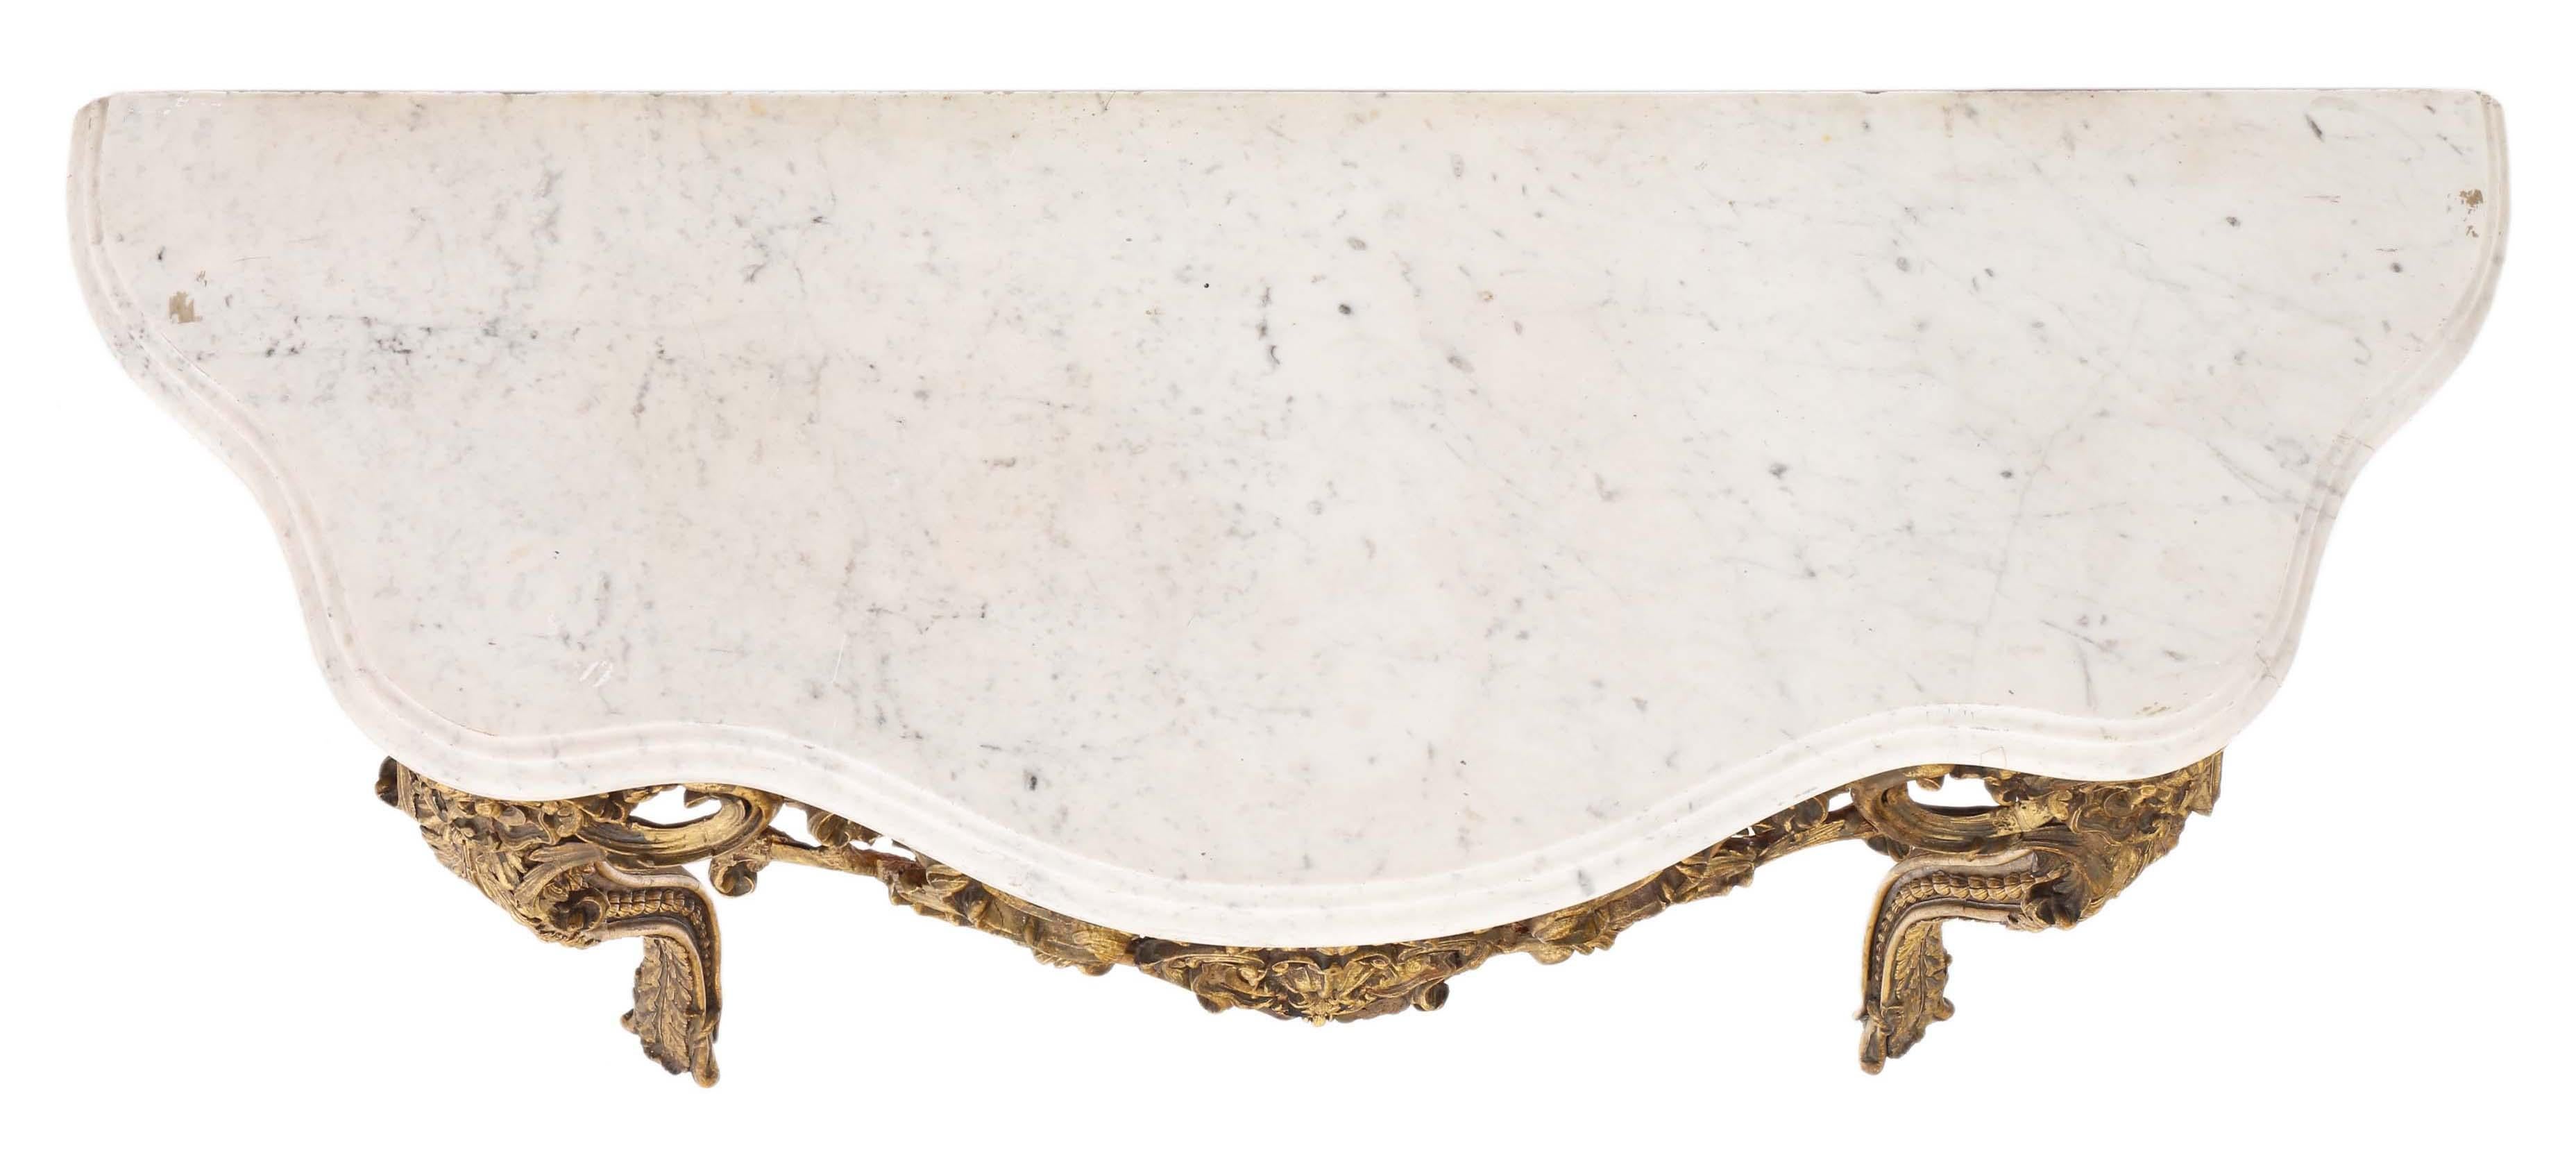 Antique large fine quality gilt and marble console table. This is a Regency revival piece dating from the early 20th Century C1920.

The table has a lovely age, colour and patina. The finishes are in good order, with decorative losses and touching